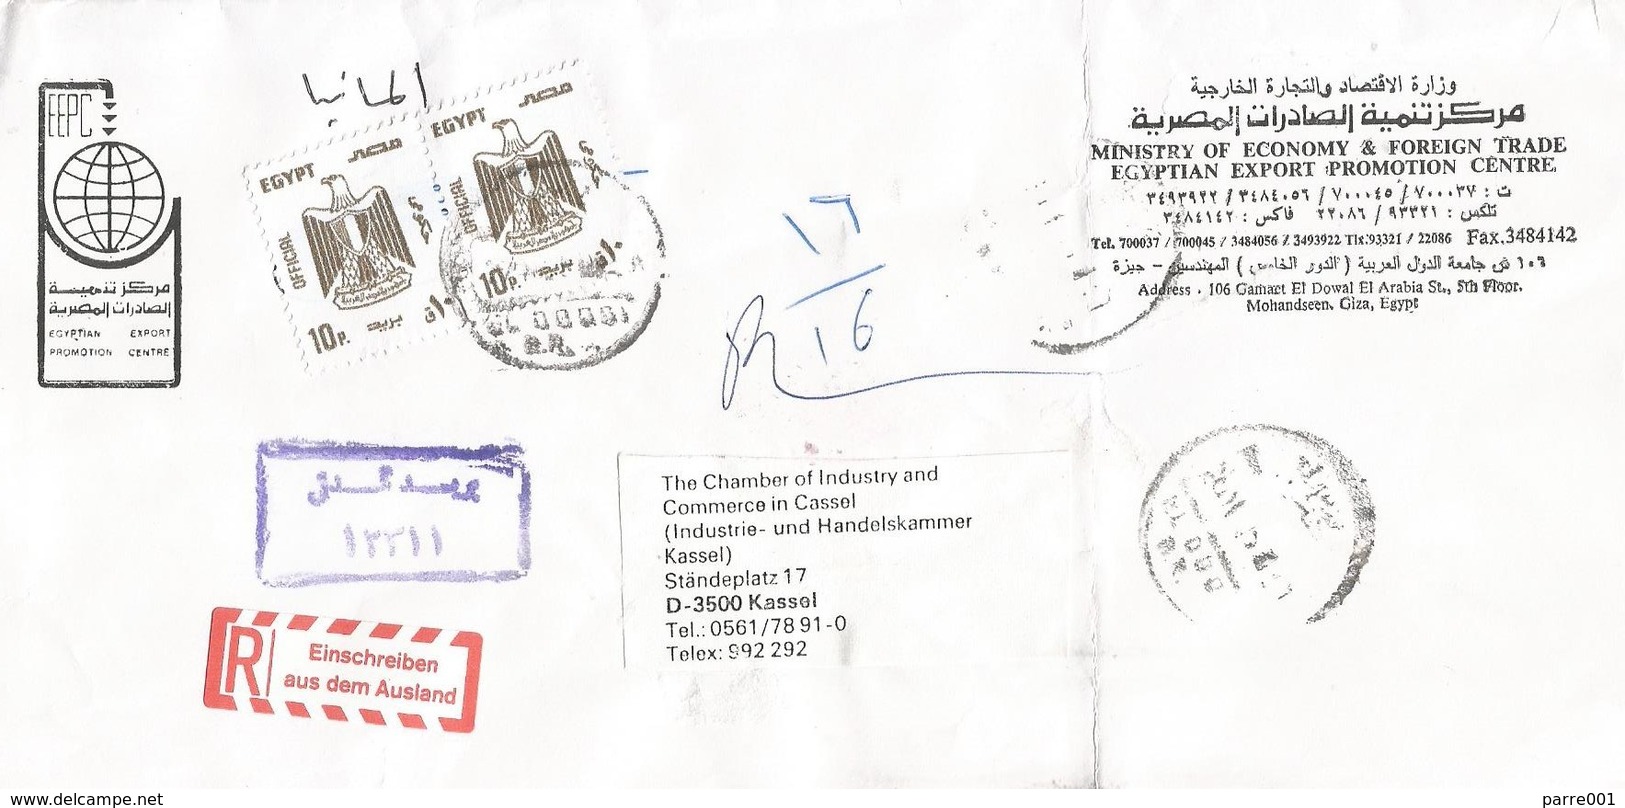 Egypt 2011 Giza Michel 112 Michel 128 Official Registered Cover - Service